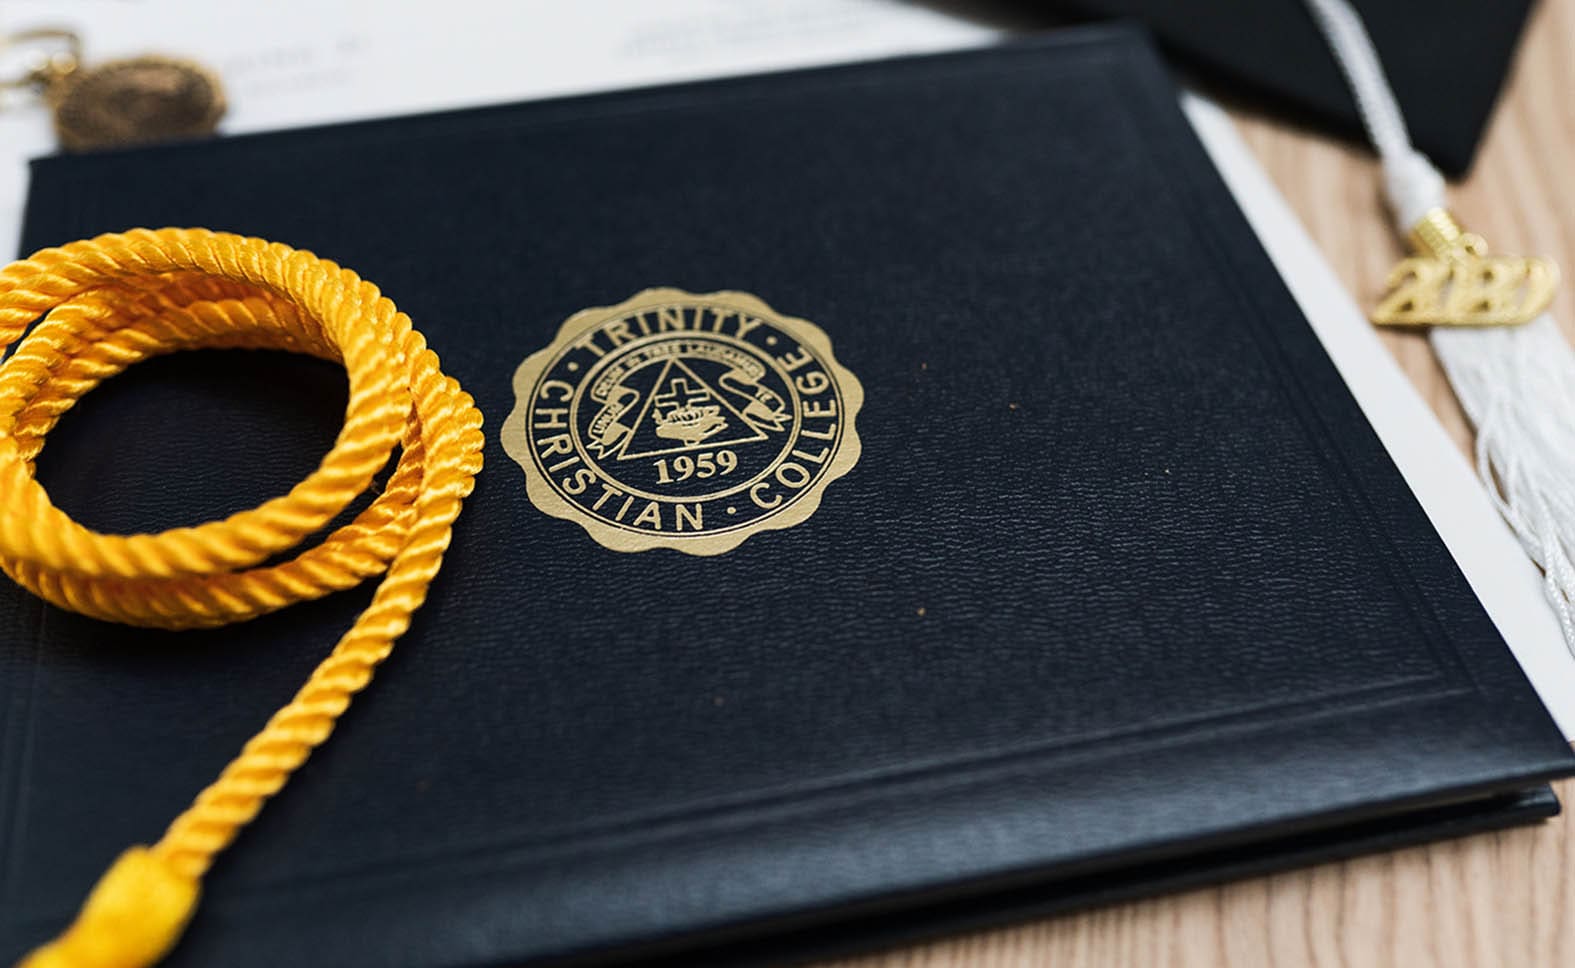 Diploma cover and tassel